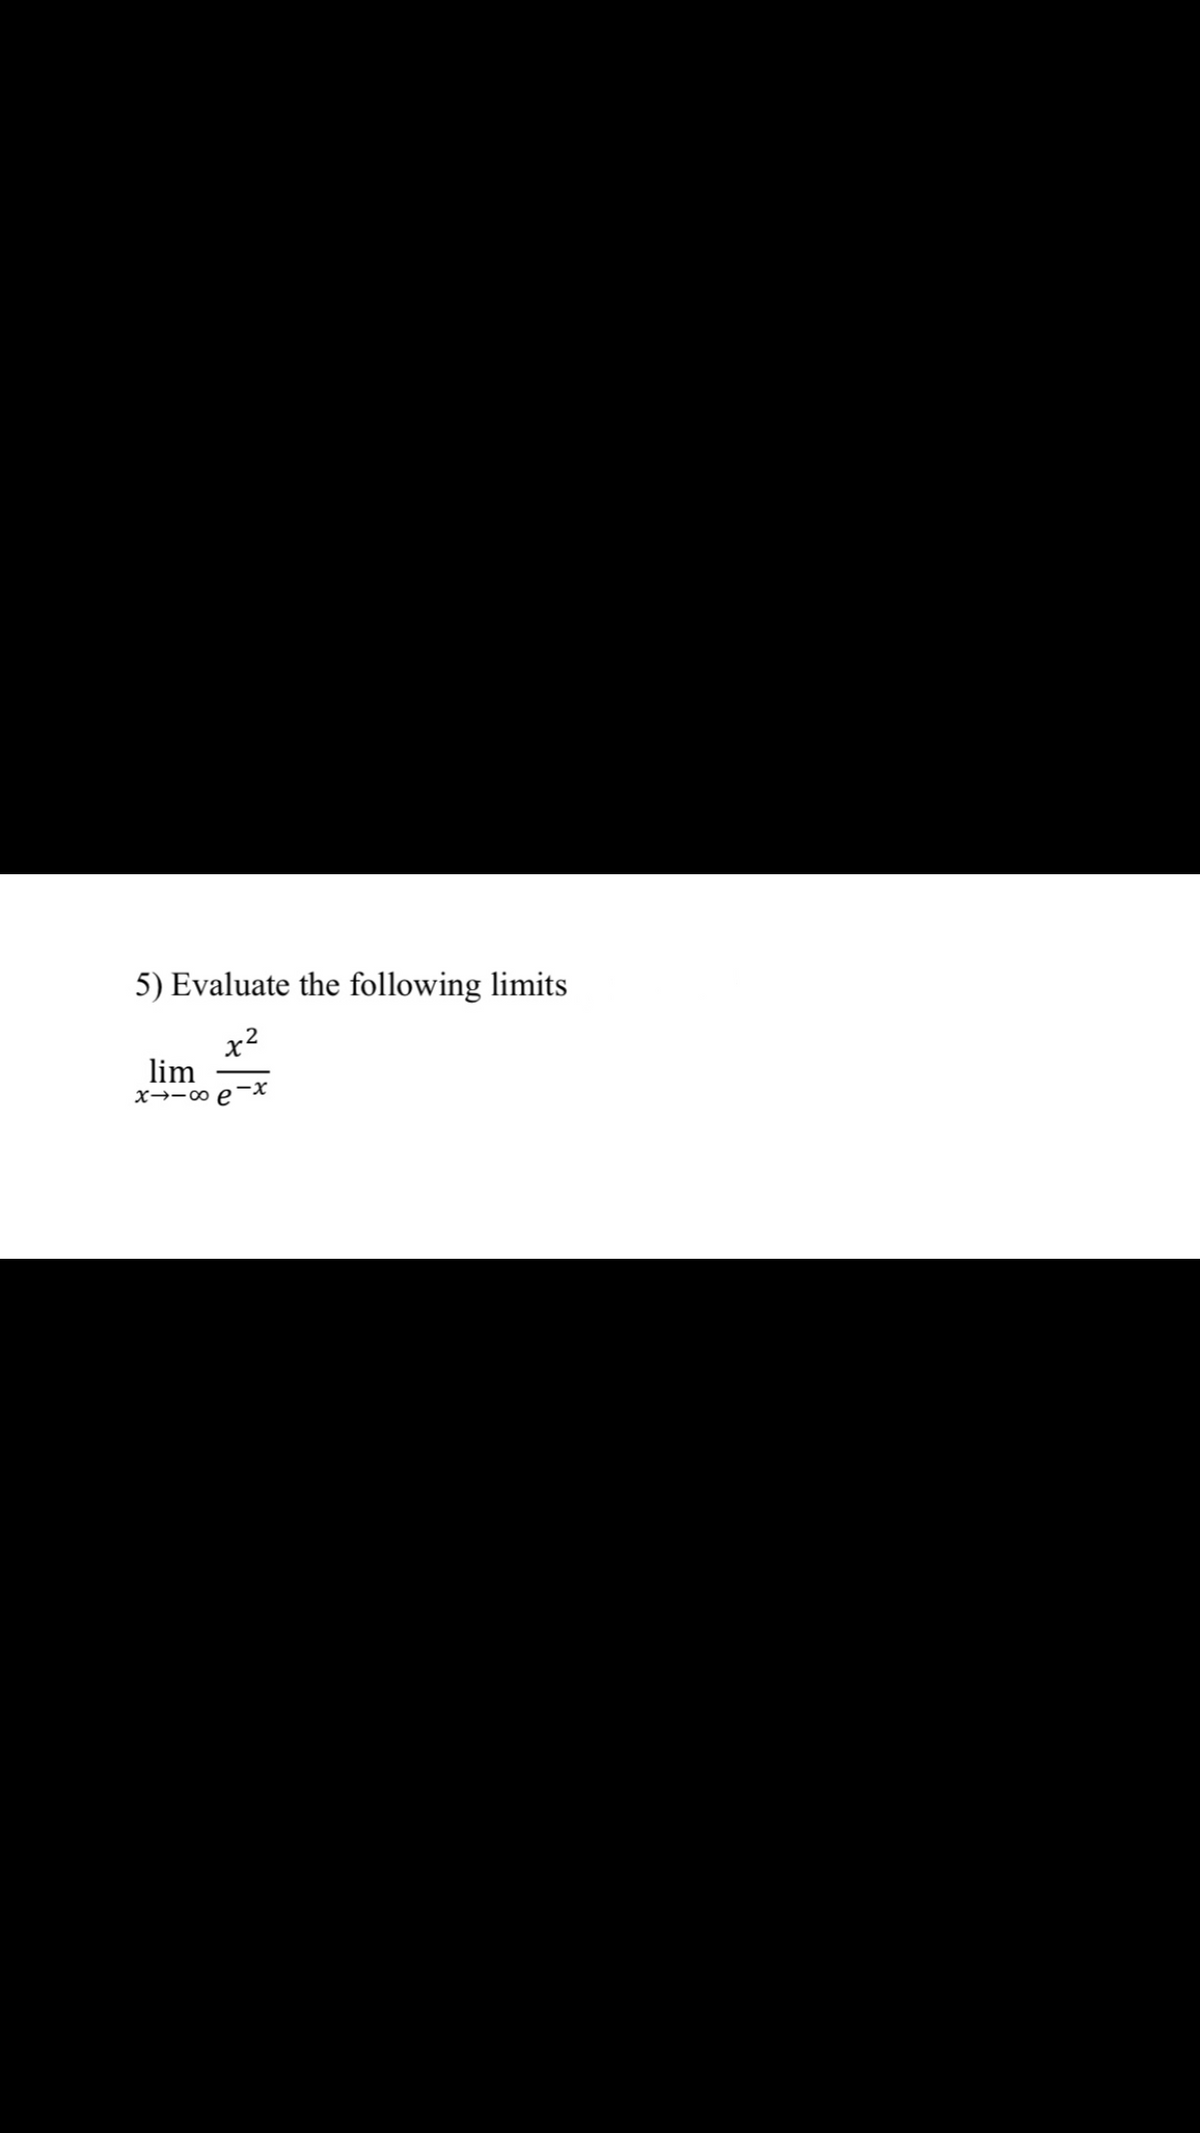 5) Evaluate the following limits
x2
lim
x→-0 e
